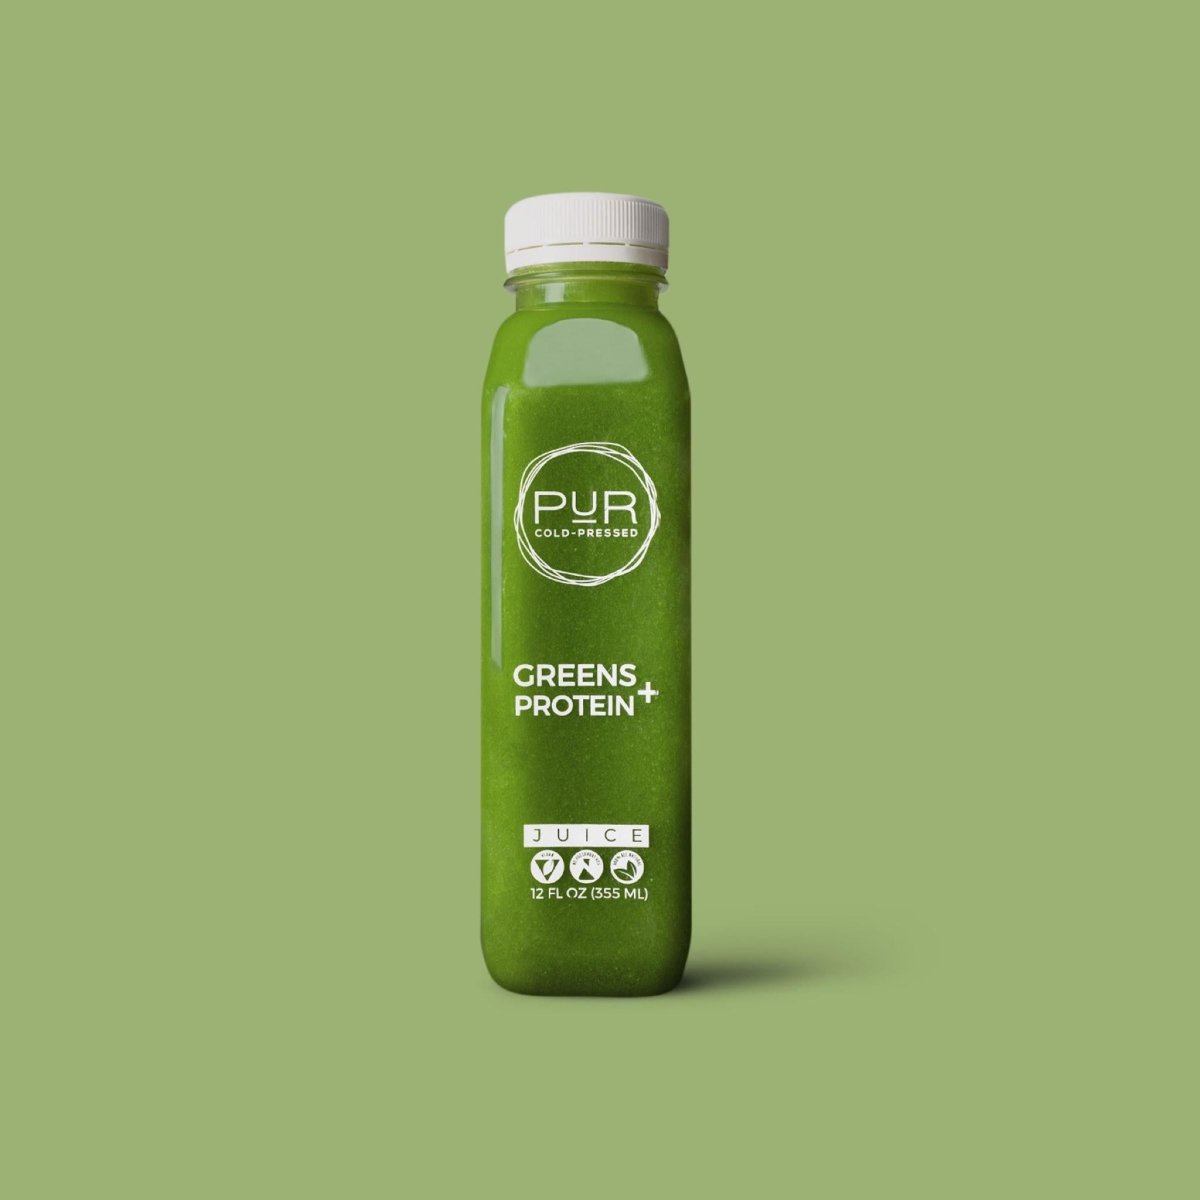 PUR juice cleanse cold pressed juice POWERHOUSE MINI JUICE CLEANSE + PROTEIN (ADD-A-MEAL) Mini Cold-Pressed Juice Cleanse | PUR Cleanse